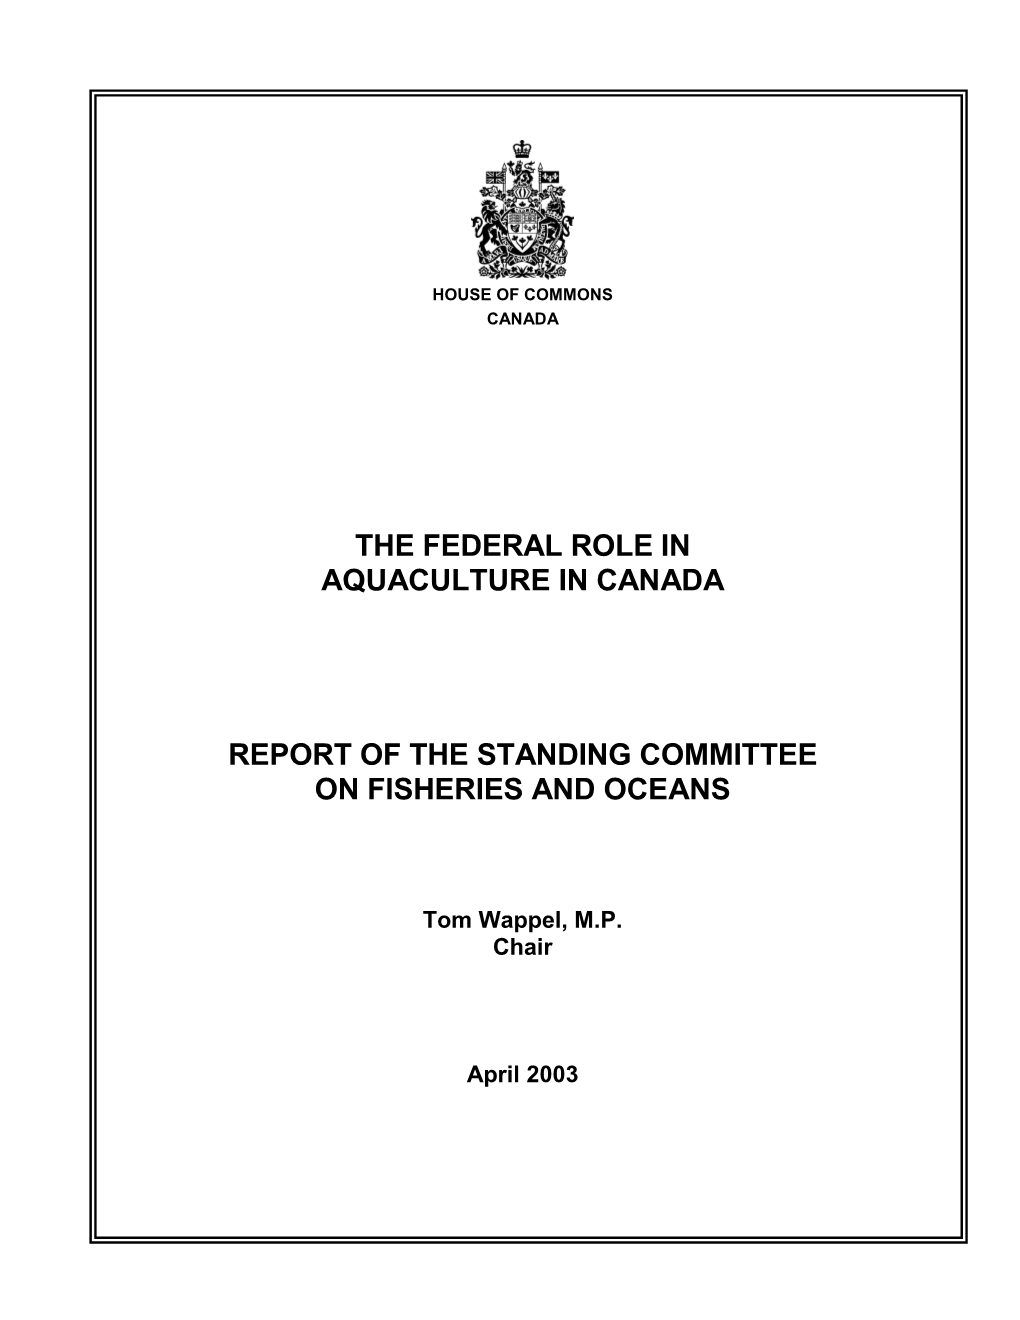 The Federal Role in Aquaculture in Canada